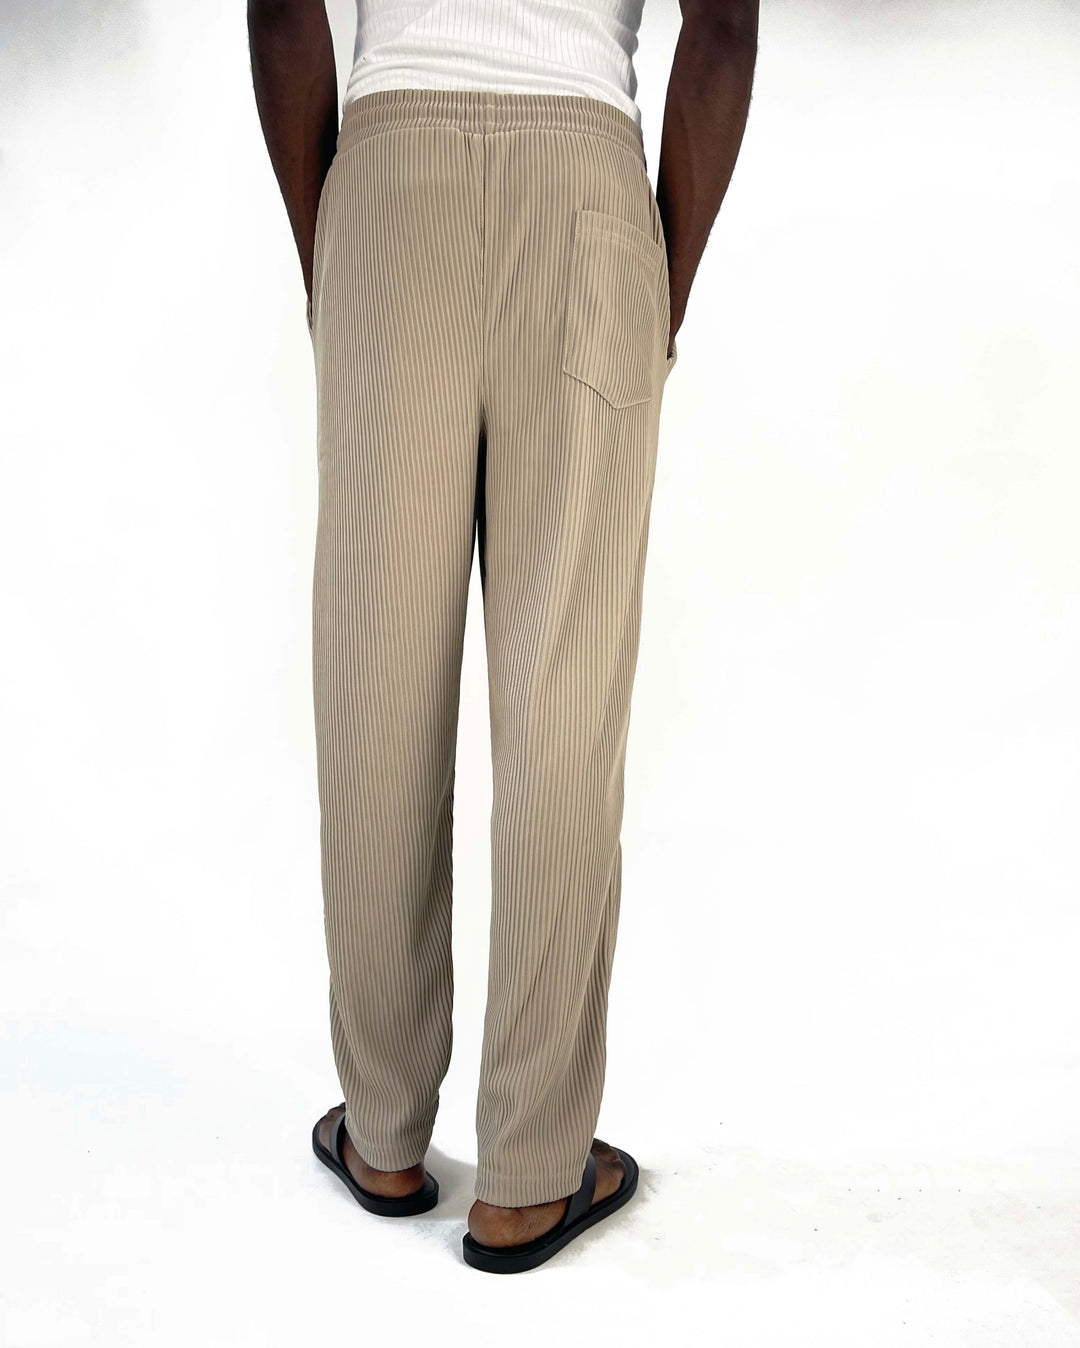 Spruce pleated pants with toggle drawstring in beige